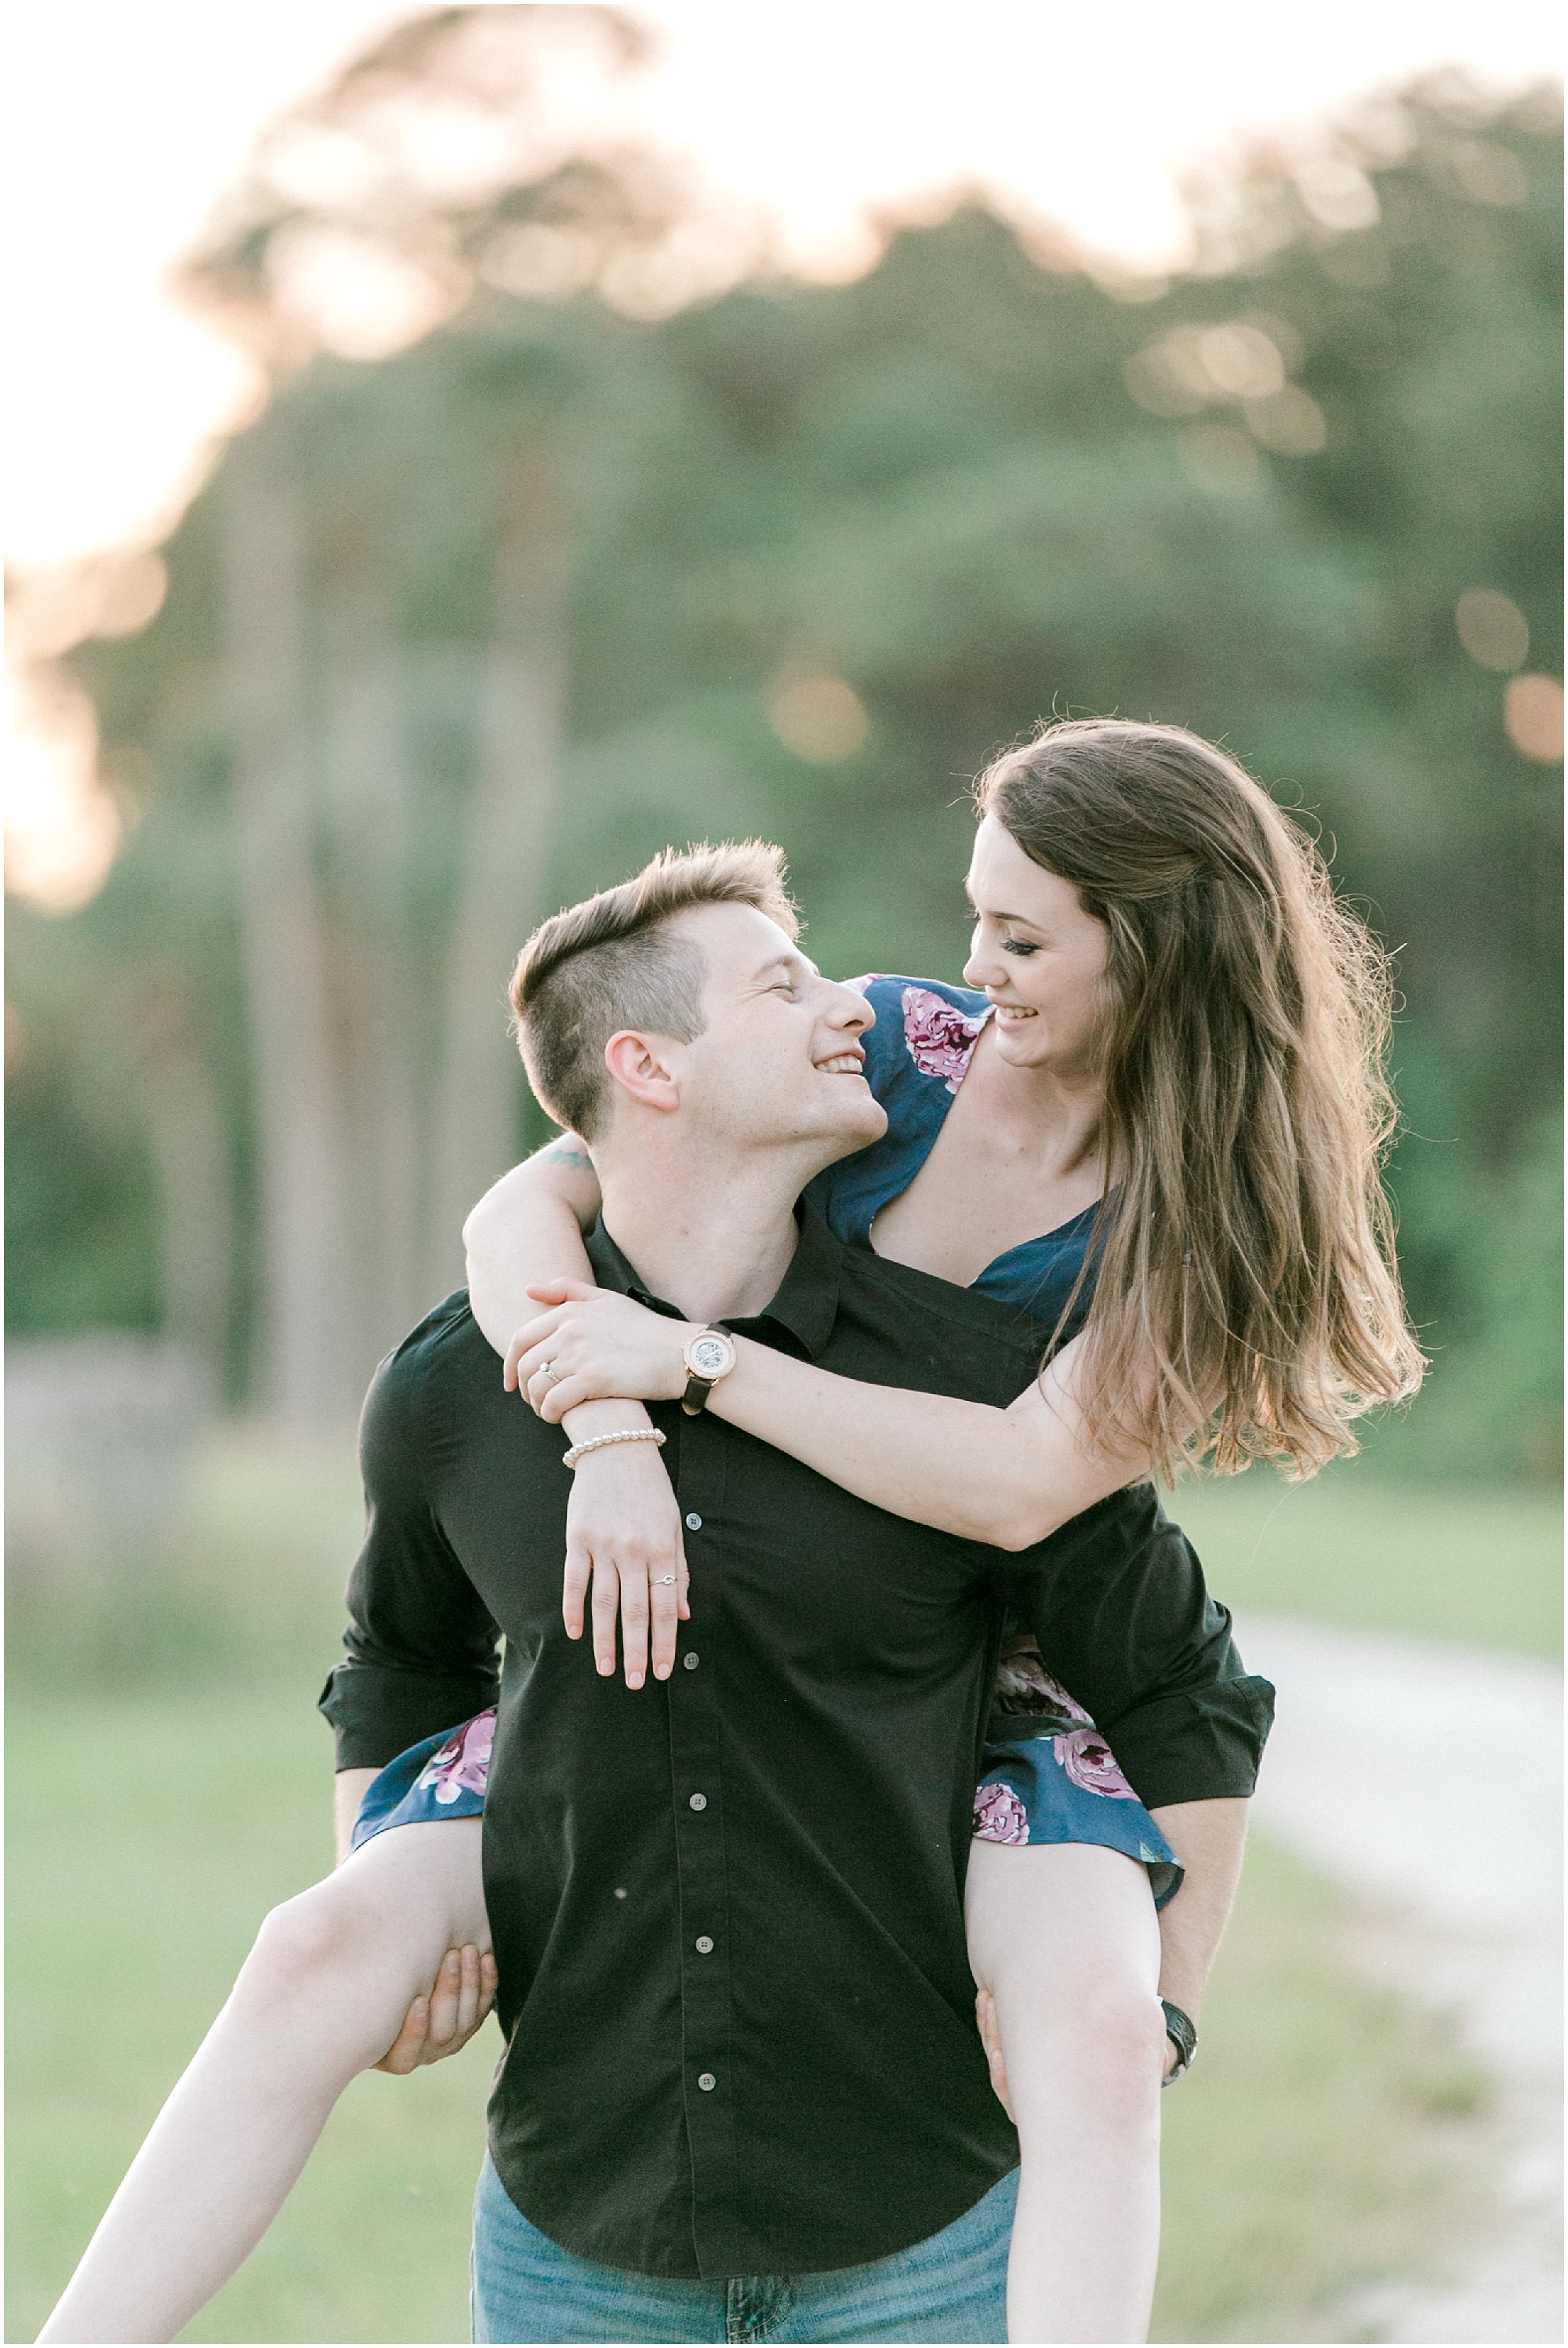 Guy giving his fiancé a piggyback ride as they walk around outdoors. 